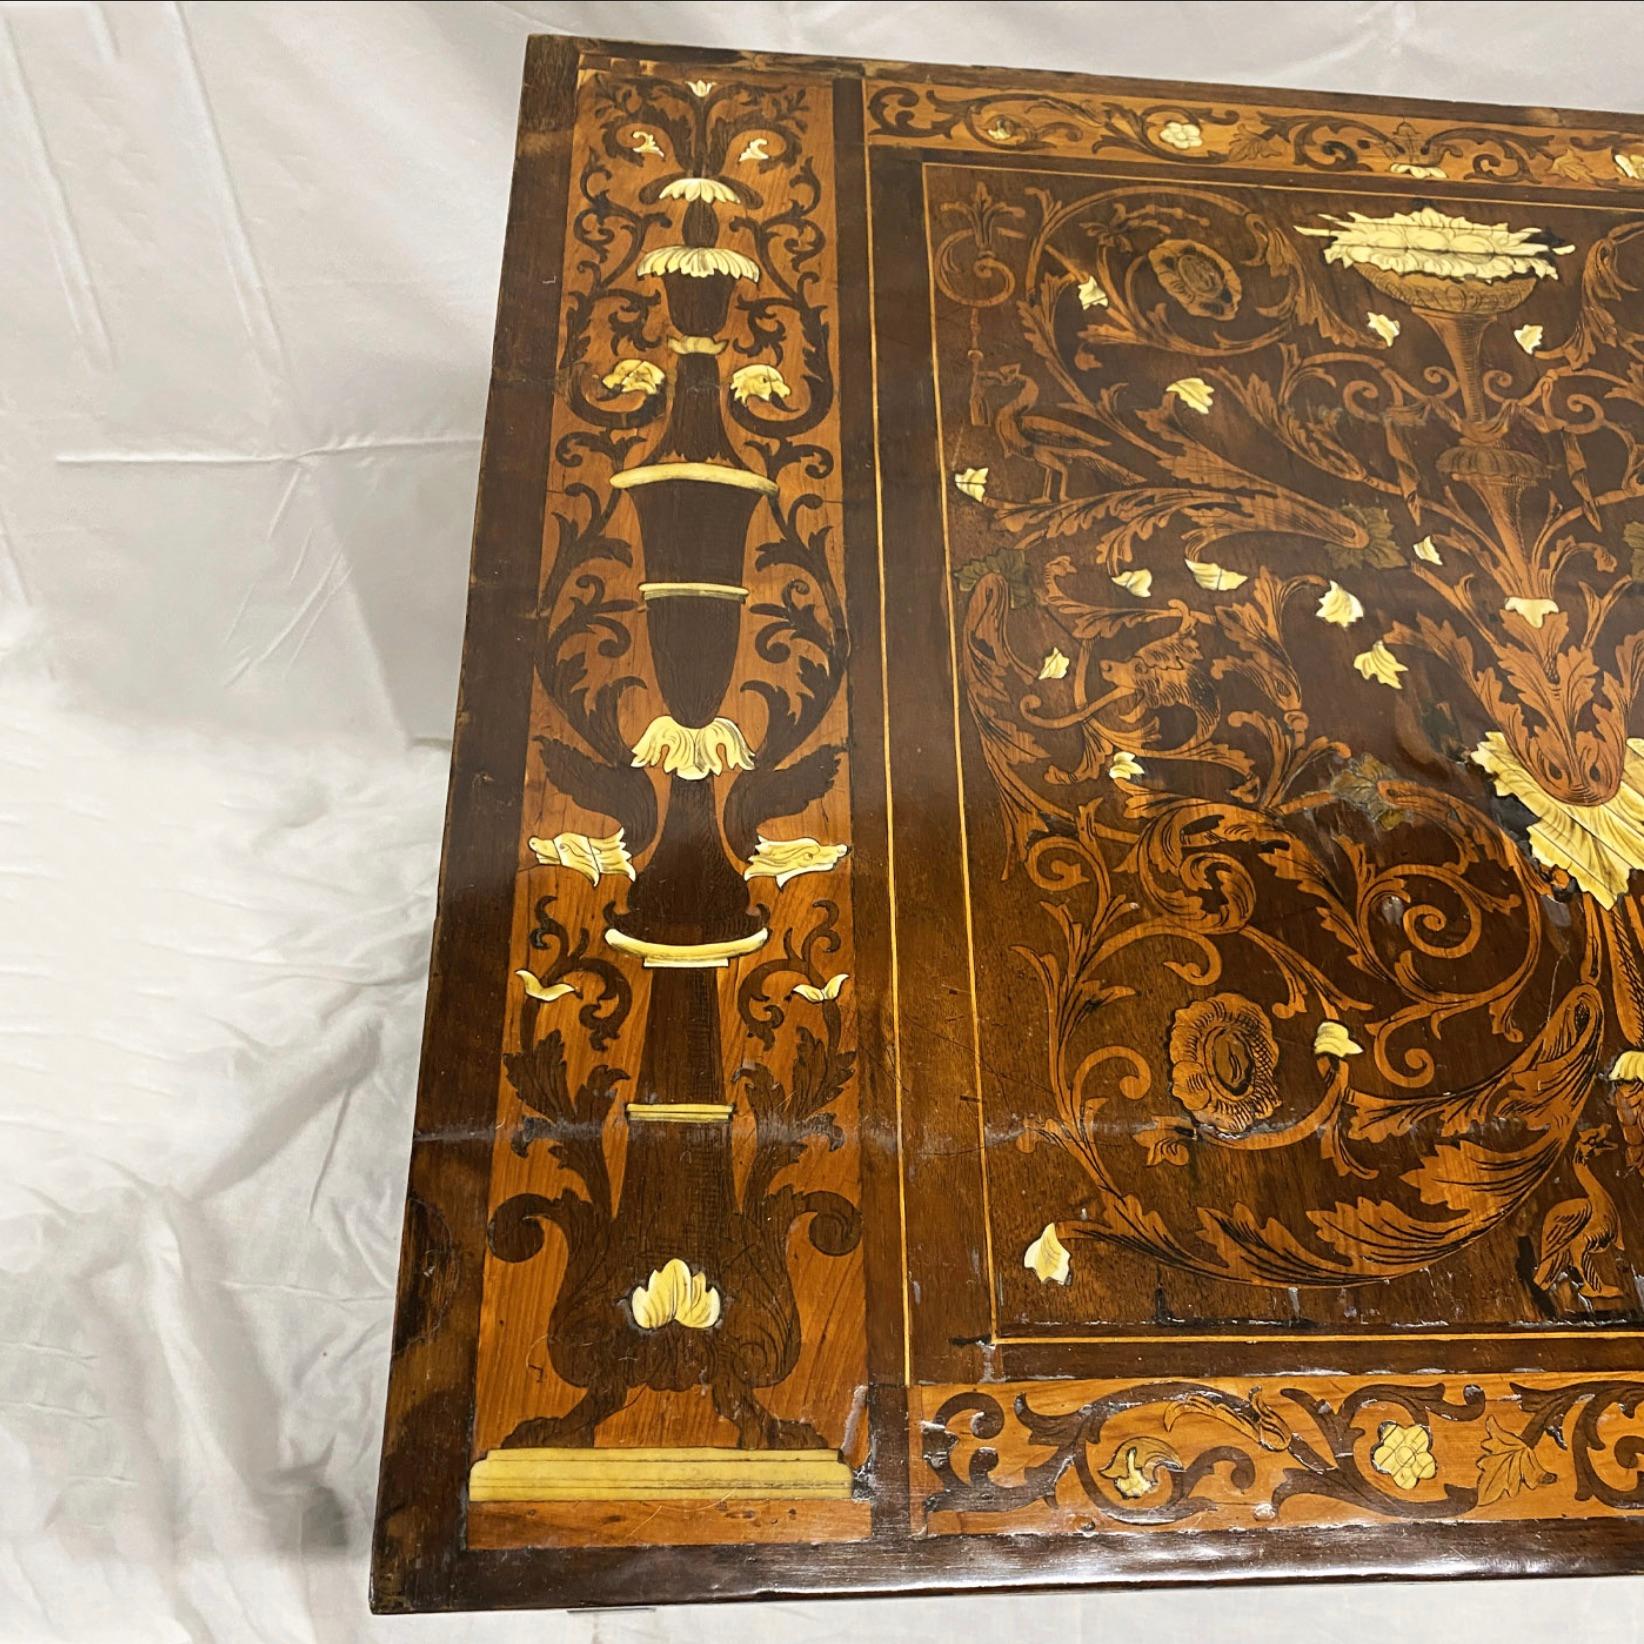 Ivory Inlaid Marquetry Table with Barley Twist Legs  In Good Condition For Sale In Sag Harbor, NY